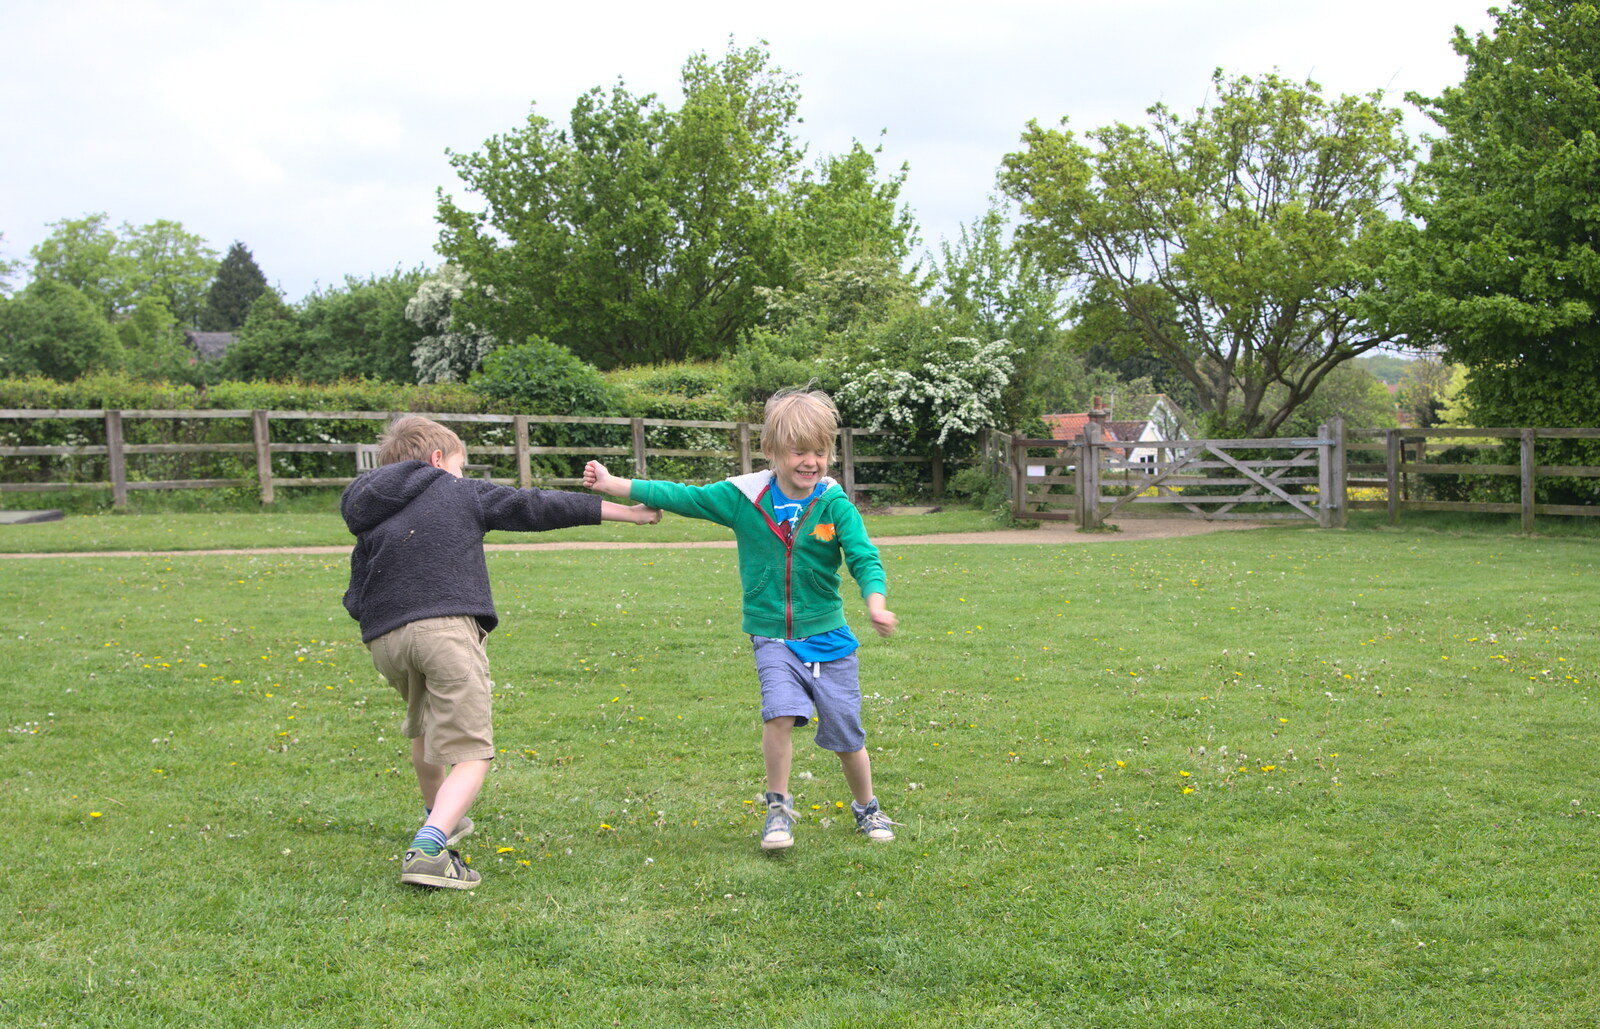 The boys have a pretend fight from A Postcard From Thaxted, Essex - 7th May 2017